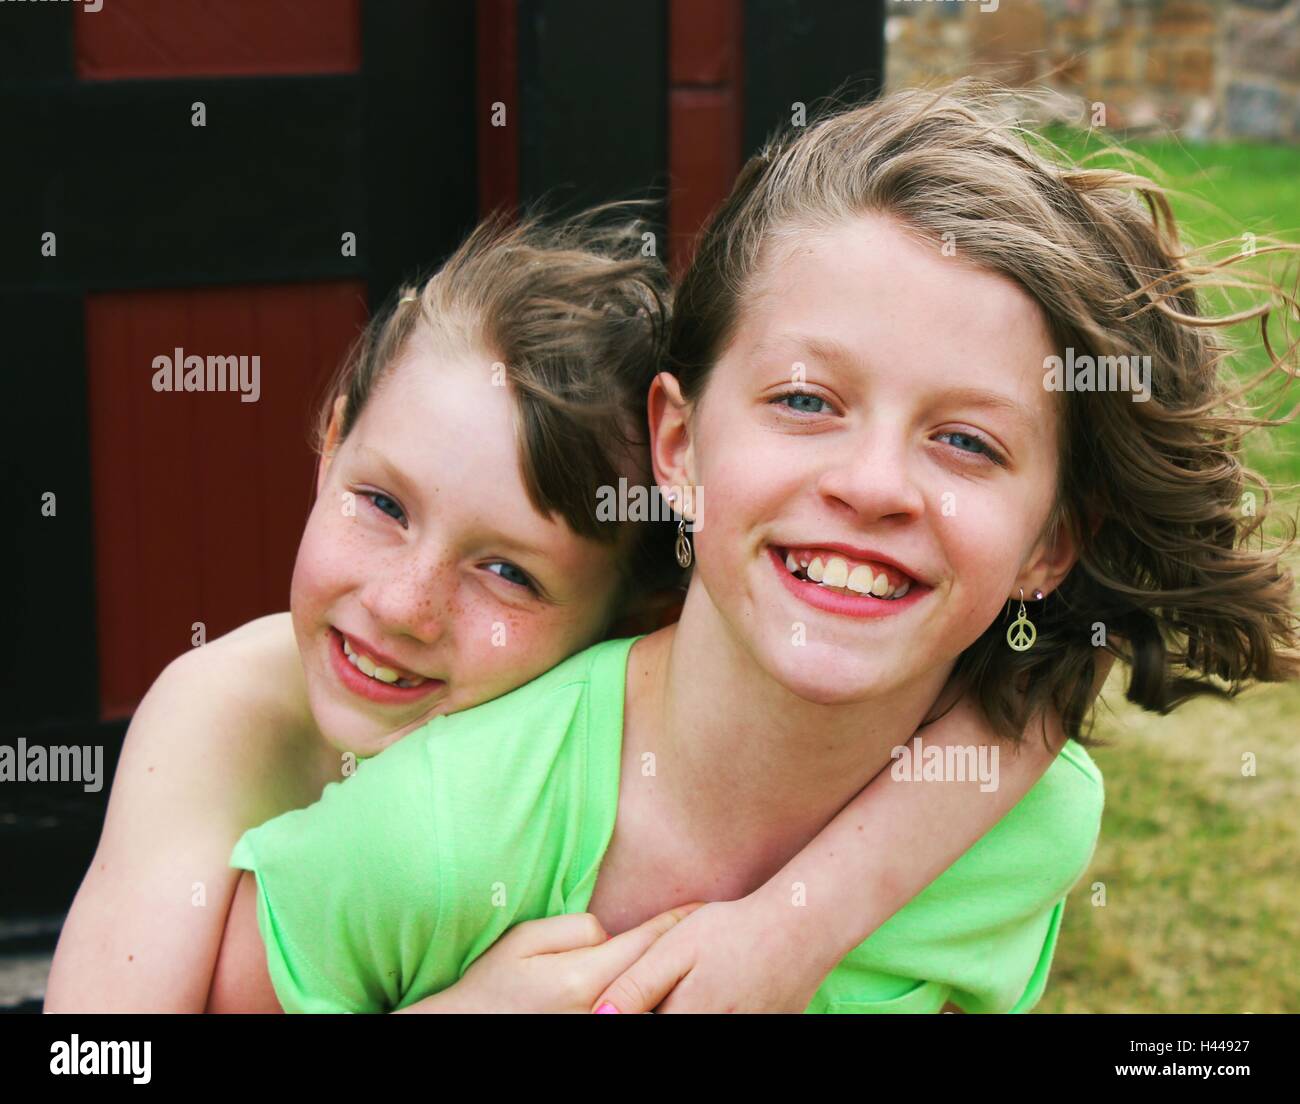 two happy young girls or siblings, sisters posing for camera, piggy back ride Stock Photo